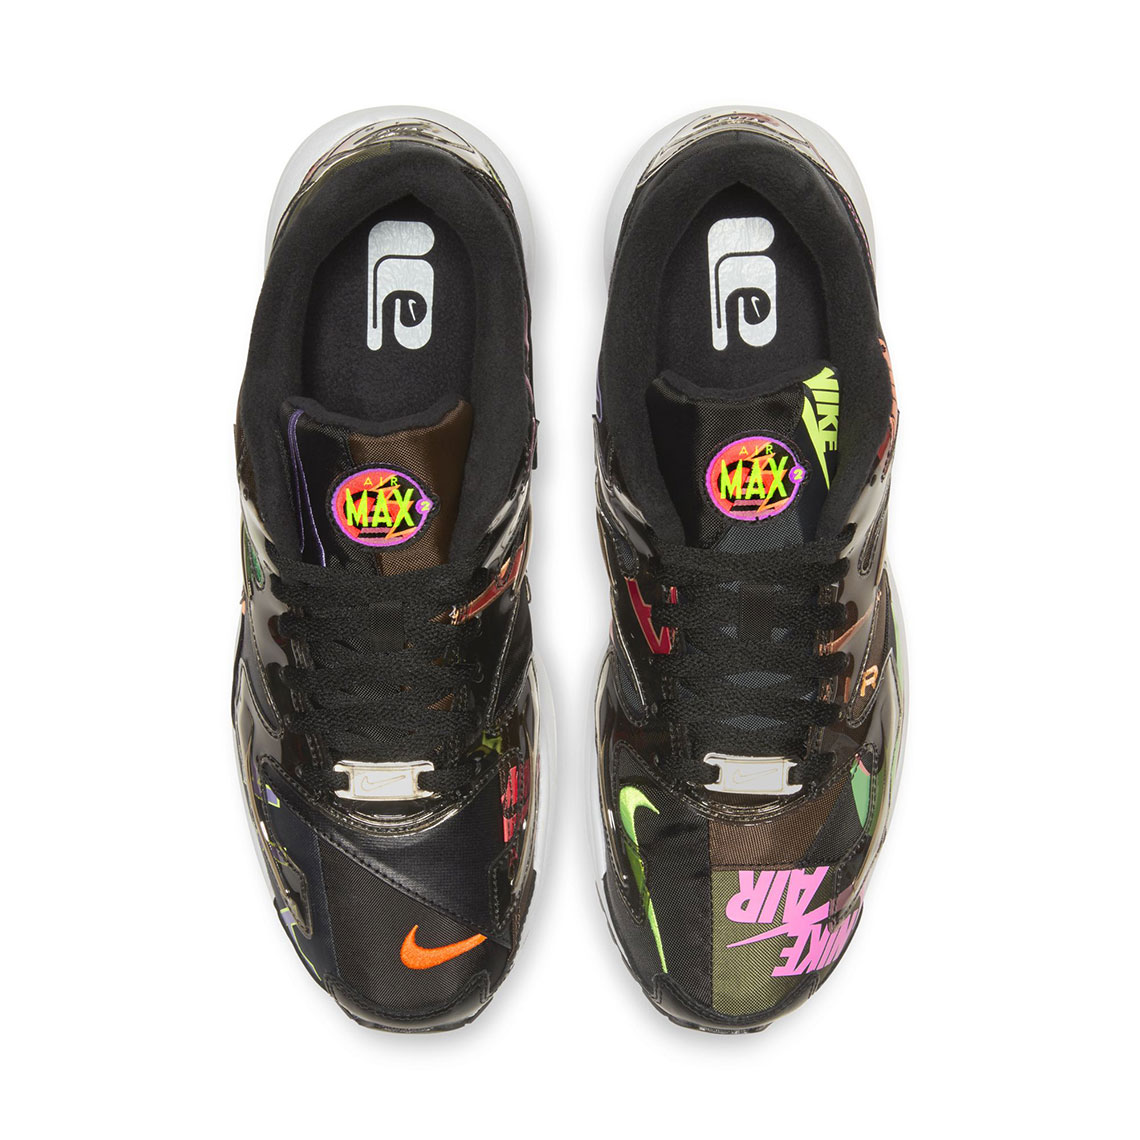 atmos Air Max 2 Light Black First Look + Release Info | SneakerNews.com